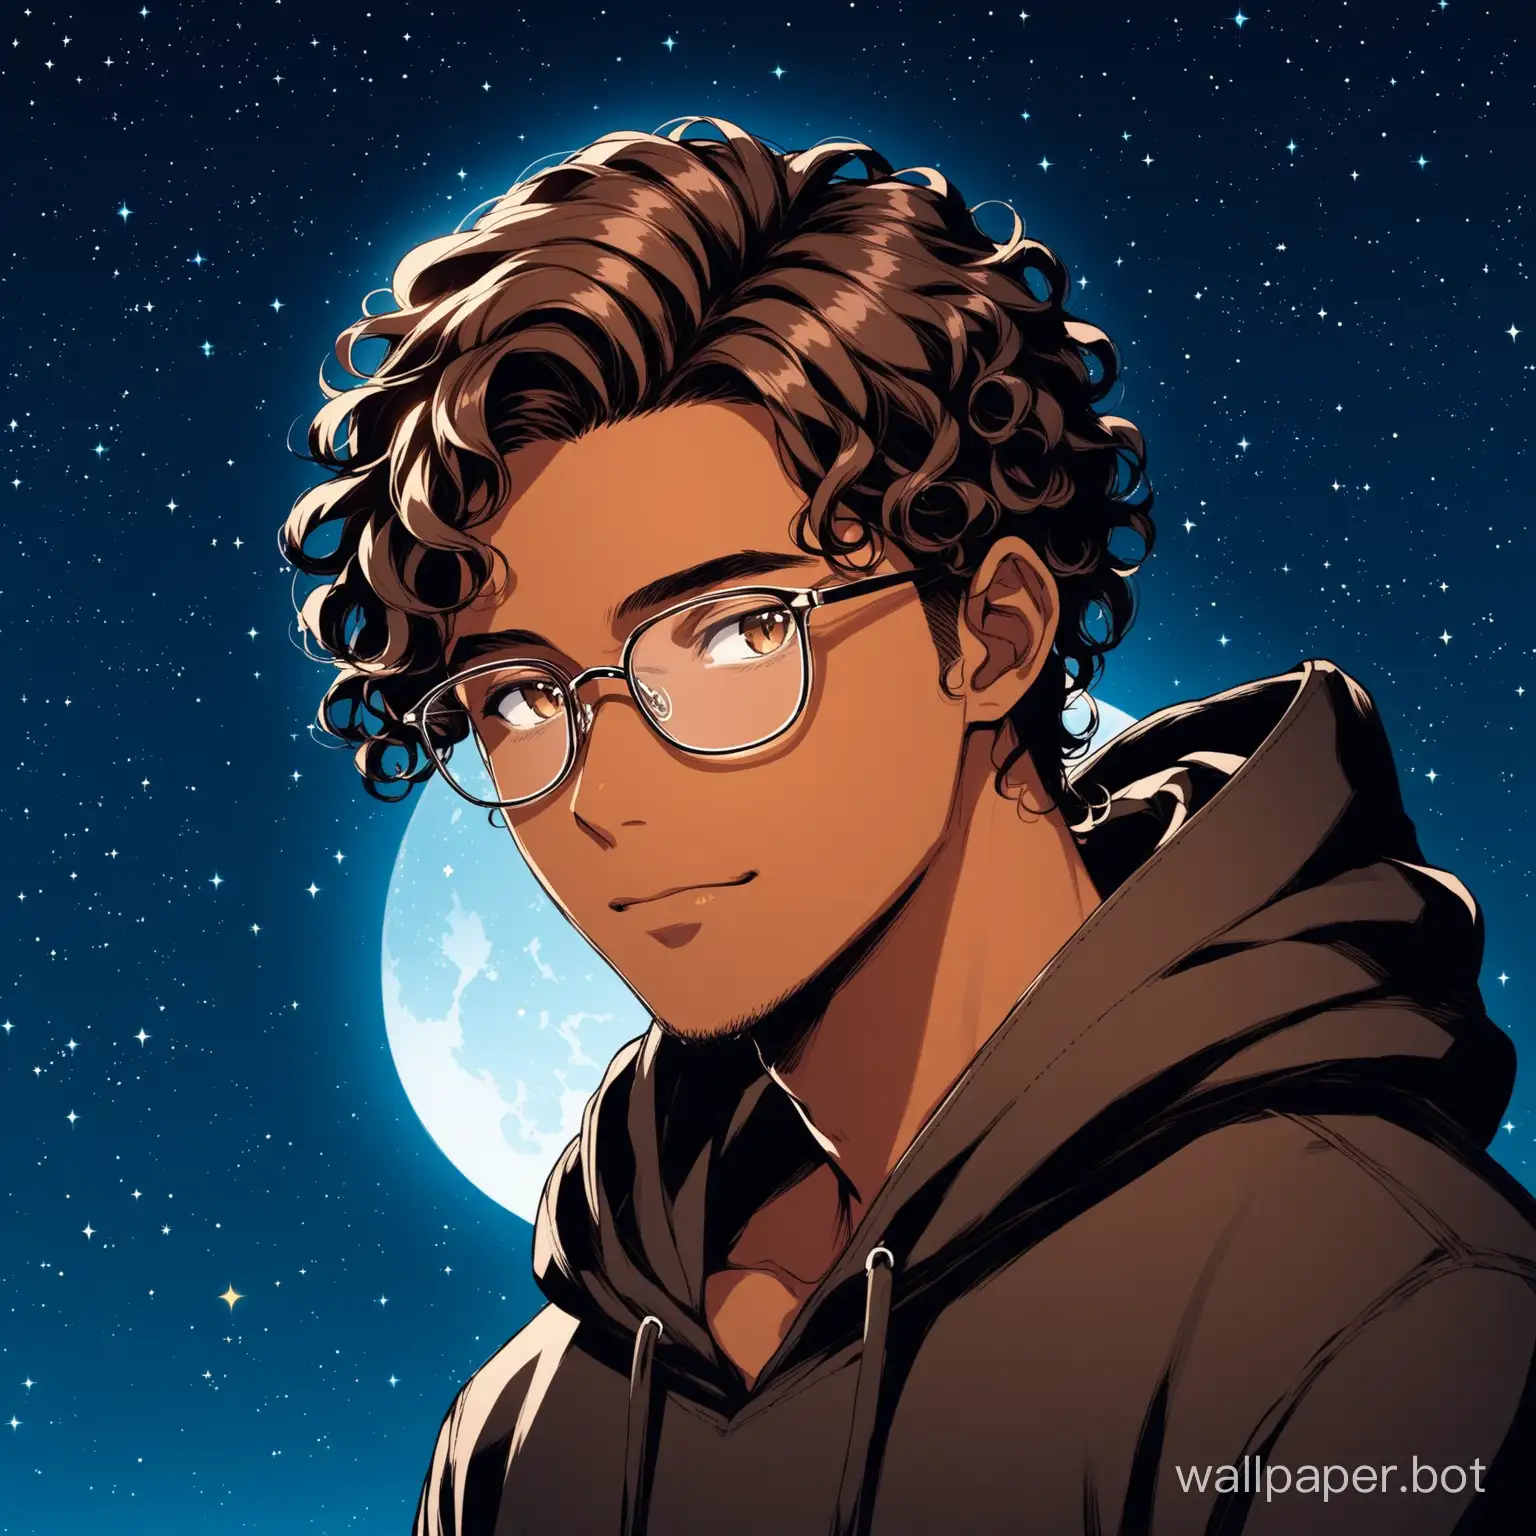 Stylish-Man-with-Curly-Hair-and-Glasses-Against-Night-Sky